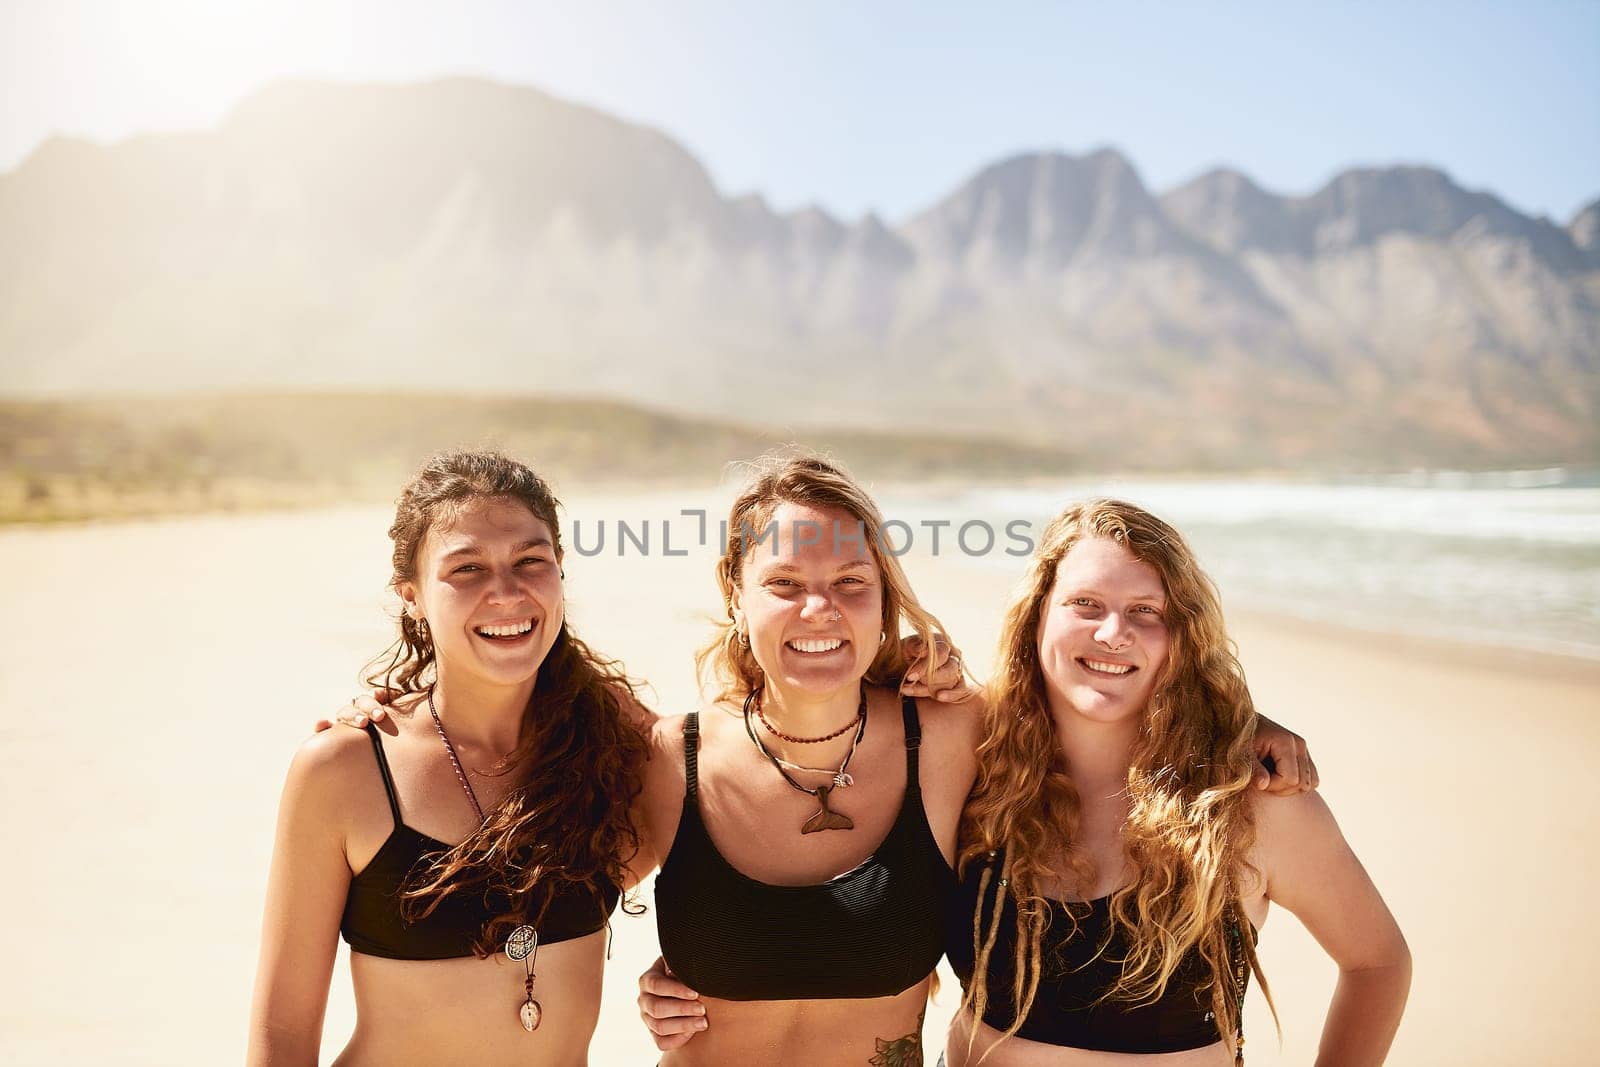 Yoga is the key to happiness. three beautiful young women at the beach for a yoga session